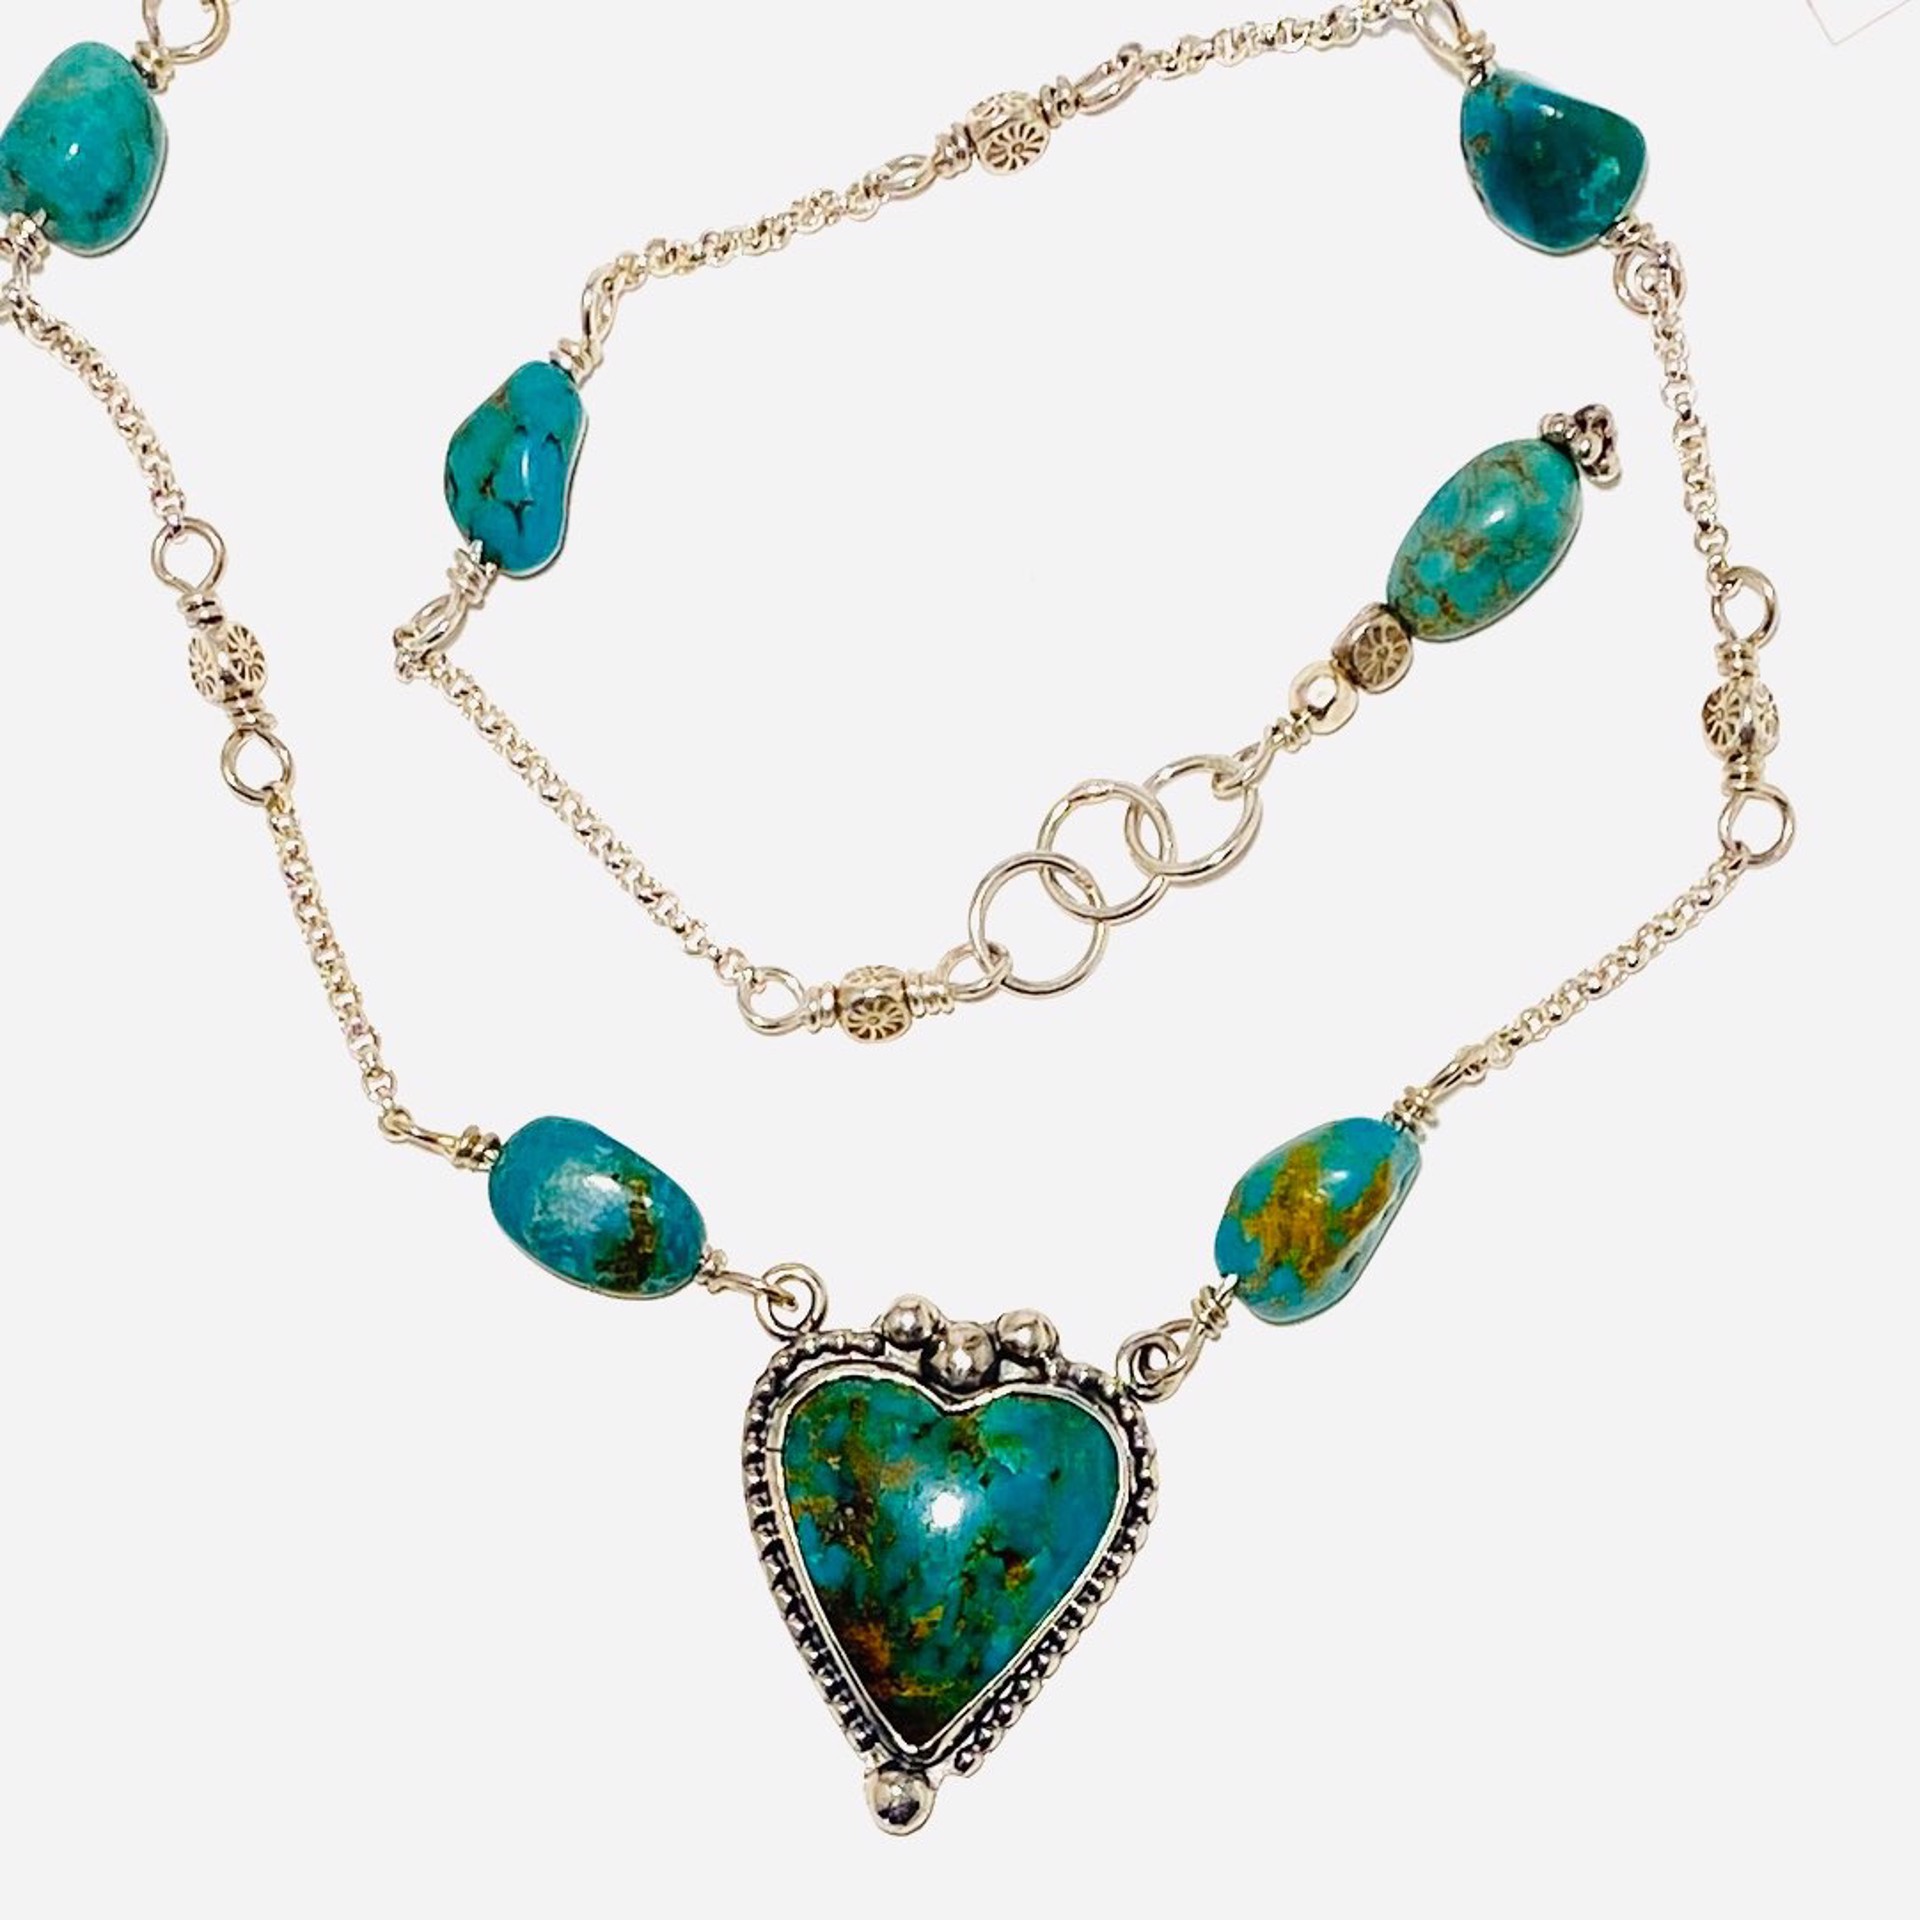 American Turquoise Heart Focal 18”Link and Turquoise Chain Necklace AB23-43 by Anne Bivens